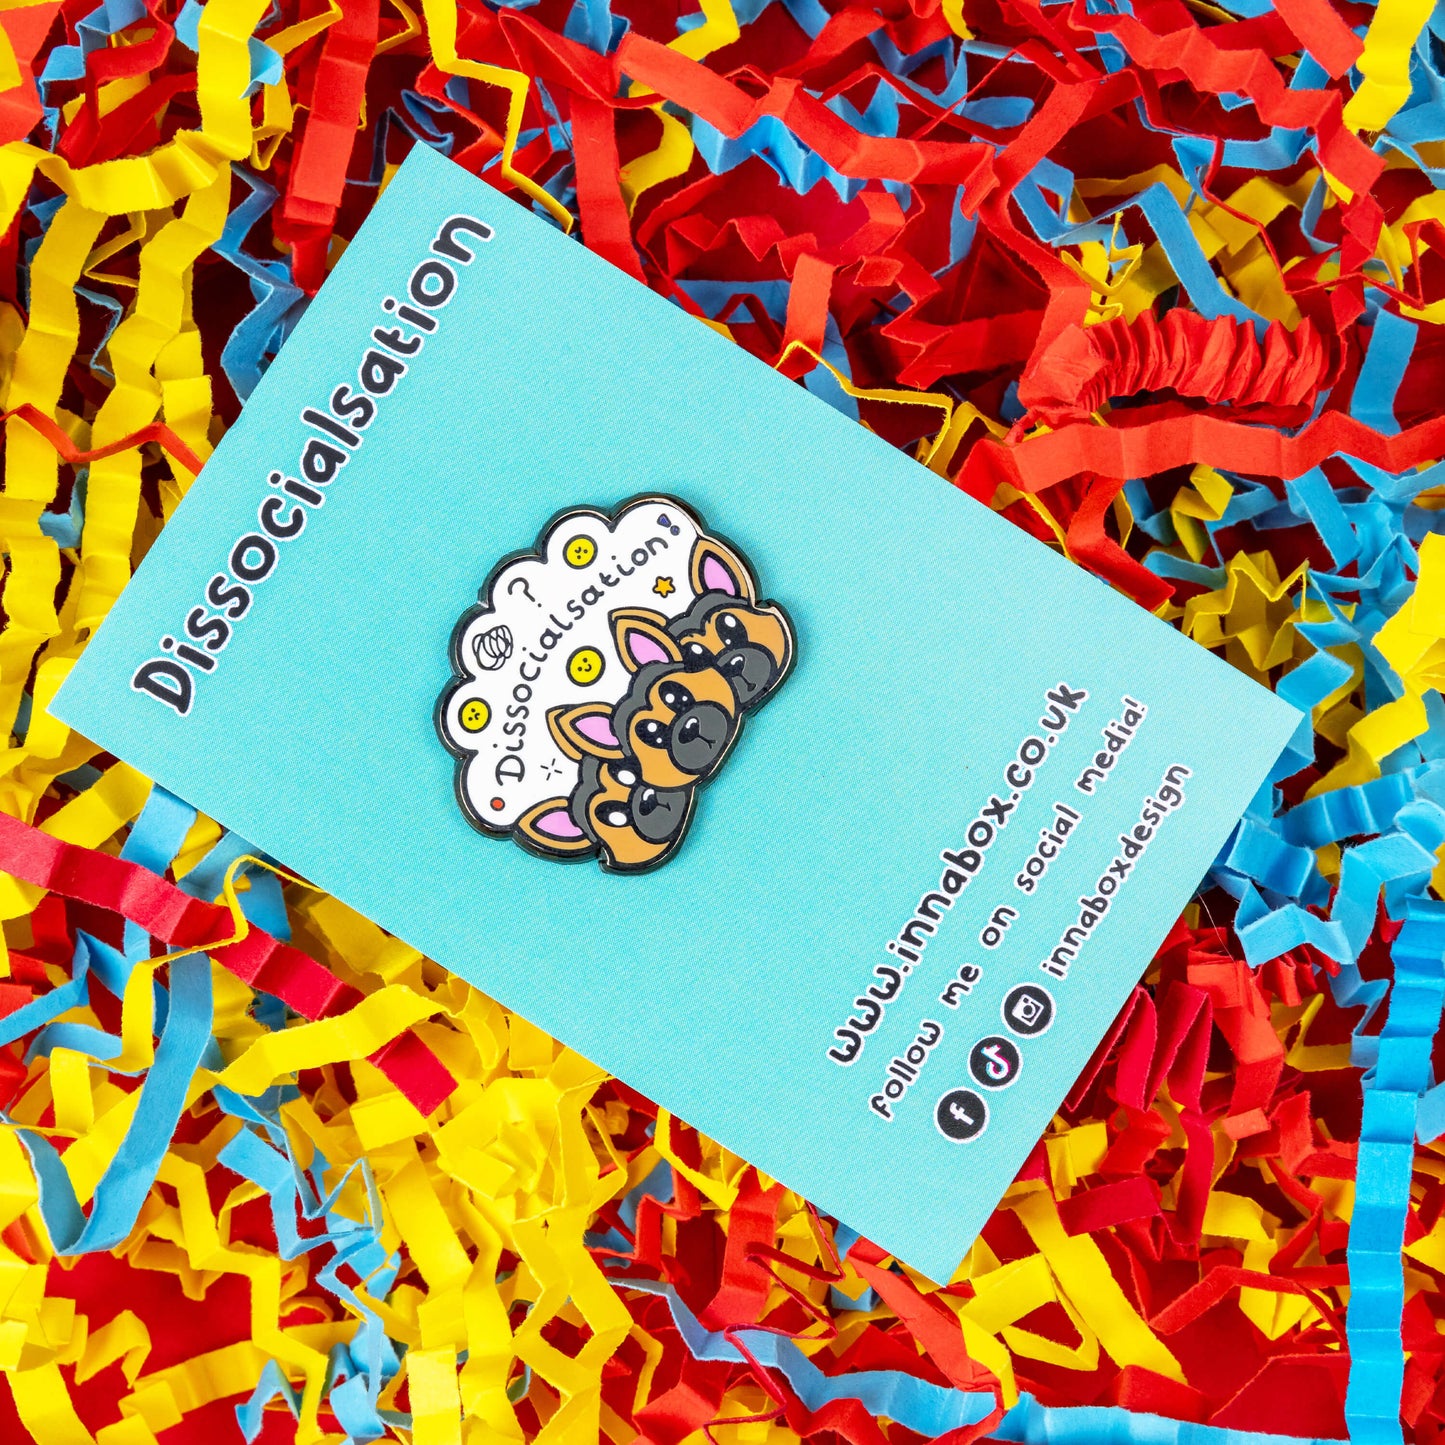 The Dissocialsation Enamel Pin - Dissociation on blue backing card on a red, blue and yellow card confetti background. Three confused brown and black Alsatian dog heads with their ears perked up, above them is a white cloud with sad and happy yellow faces, sparkles, question marks and black text reading 'dissocialsation!'. The design is raising awareness for dissociation.